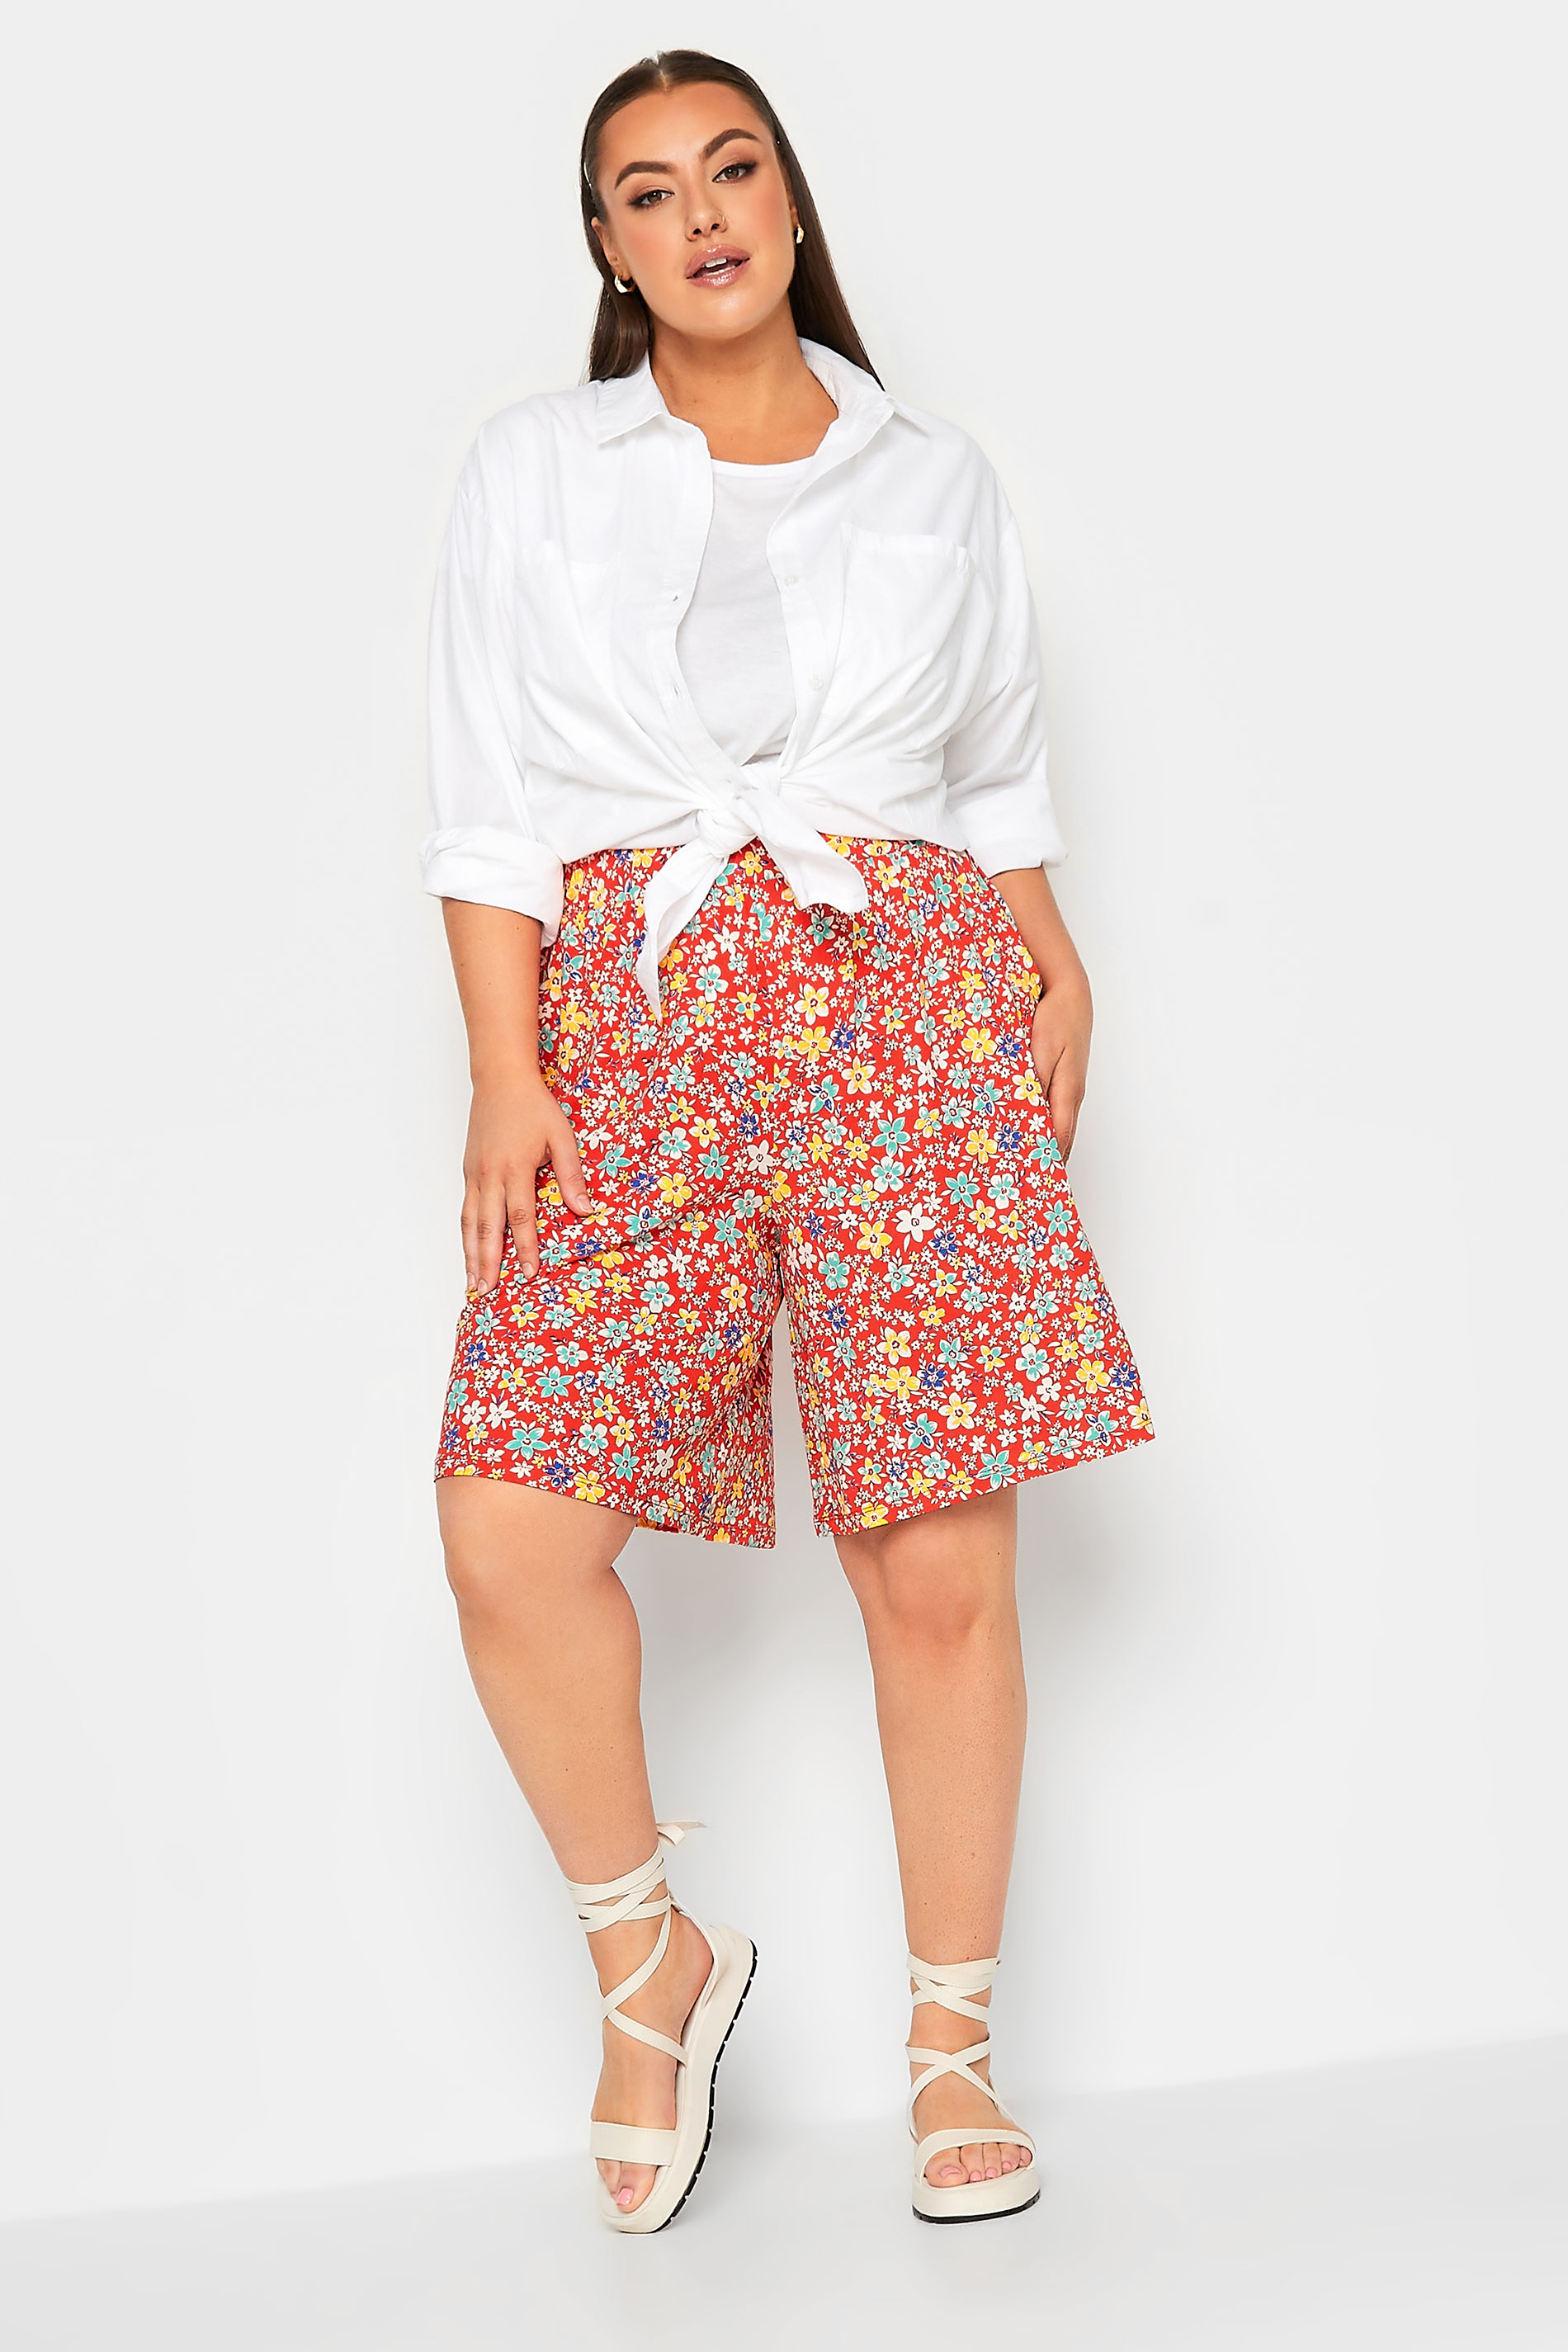 Kontoret Studerende Gum YOURS Plus Size Red Floral Print Pull On Shorts | Yours Clothing